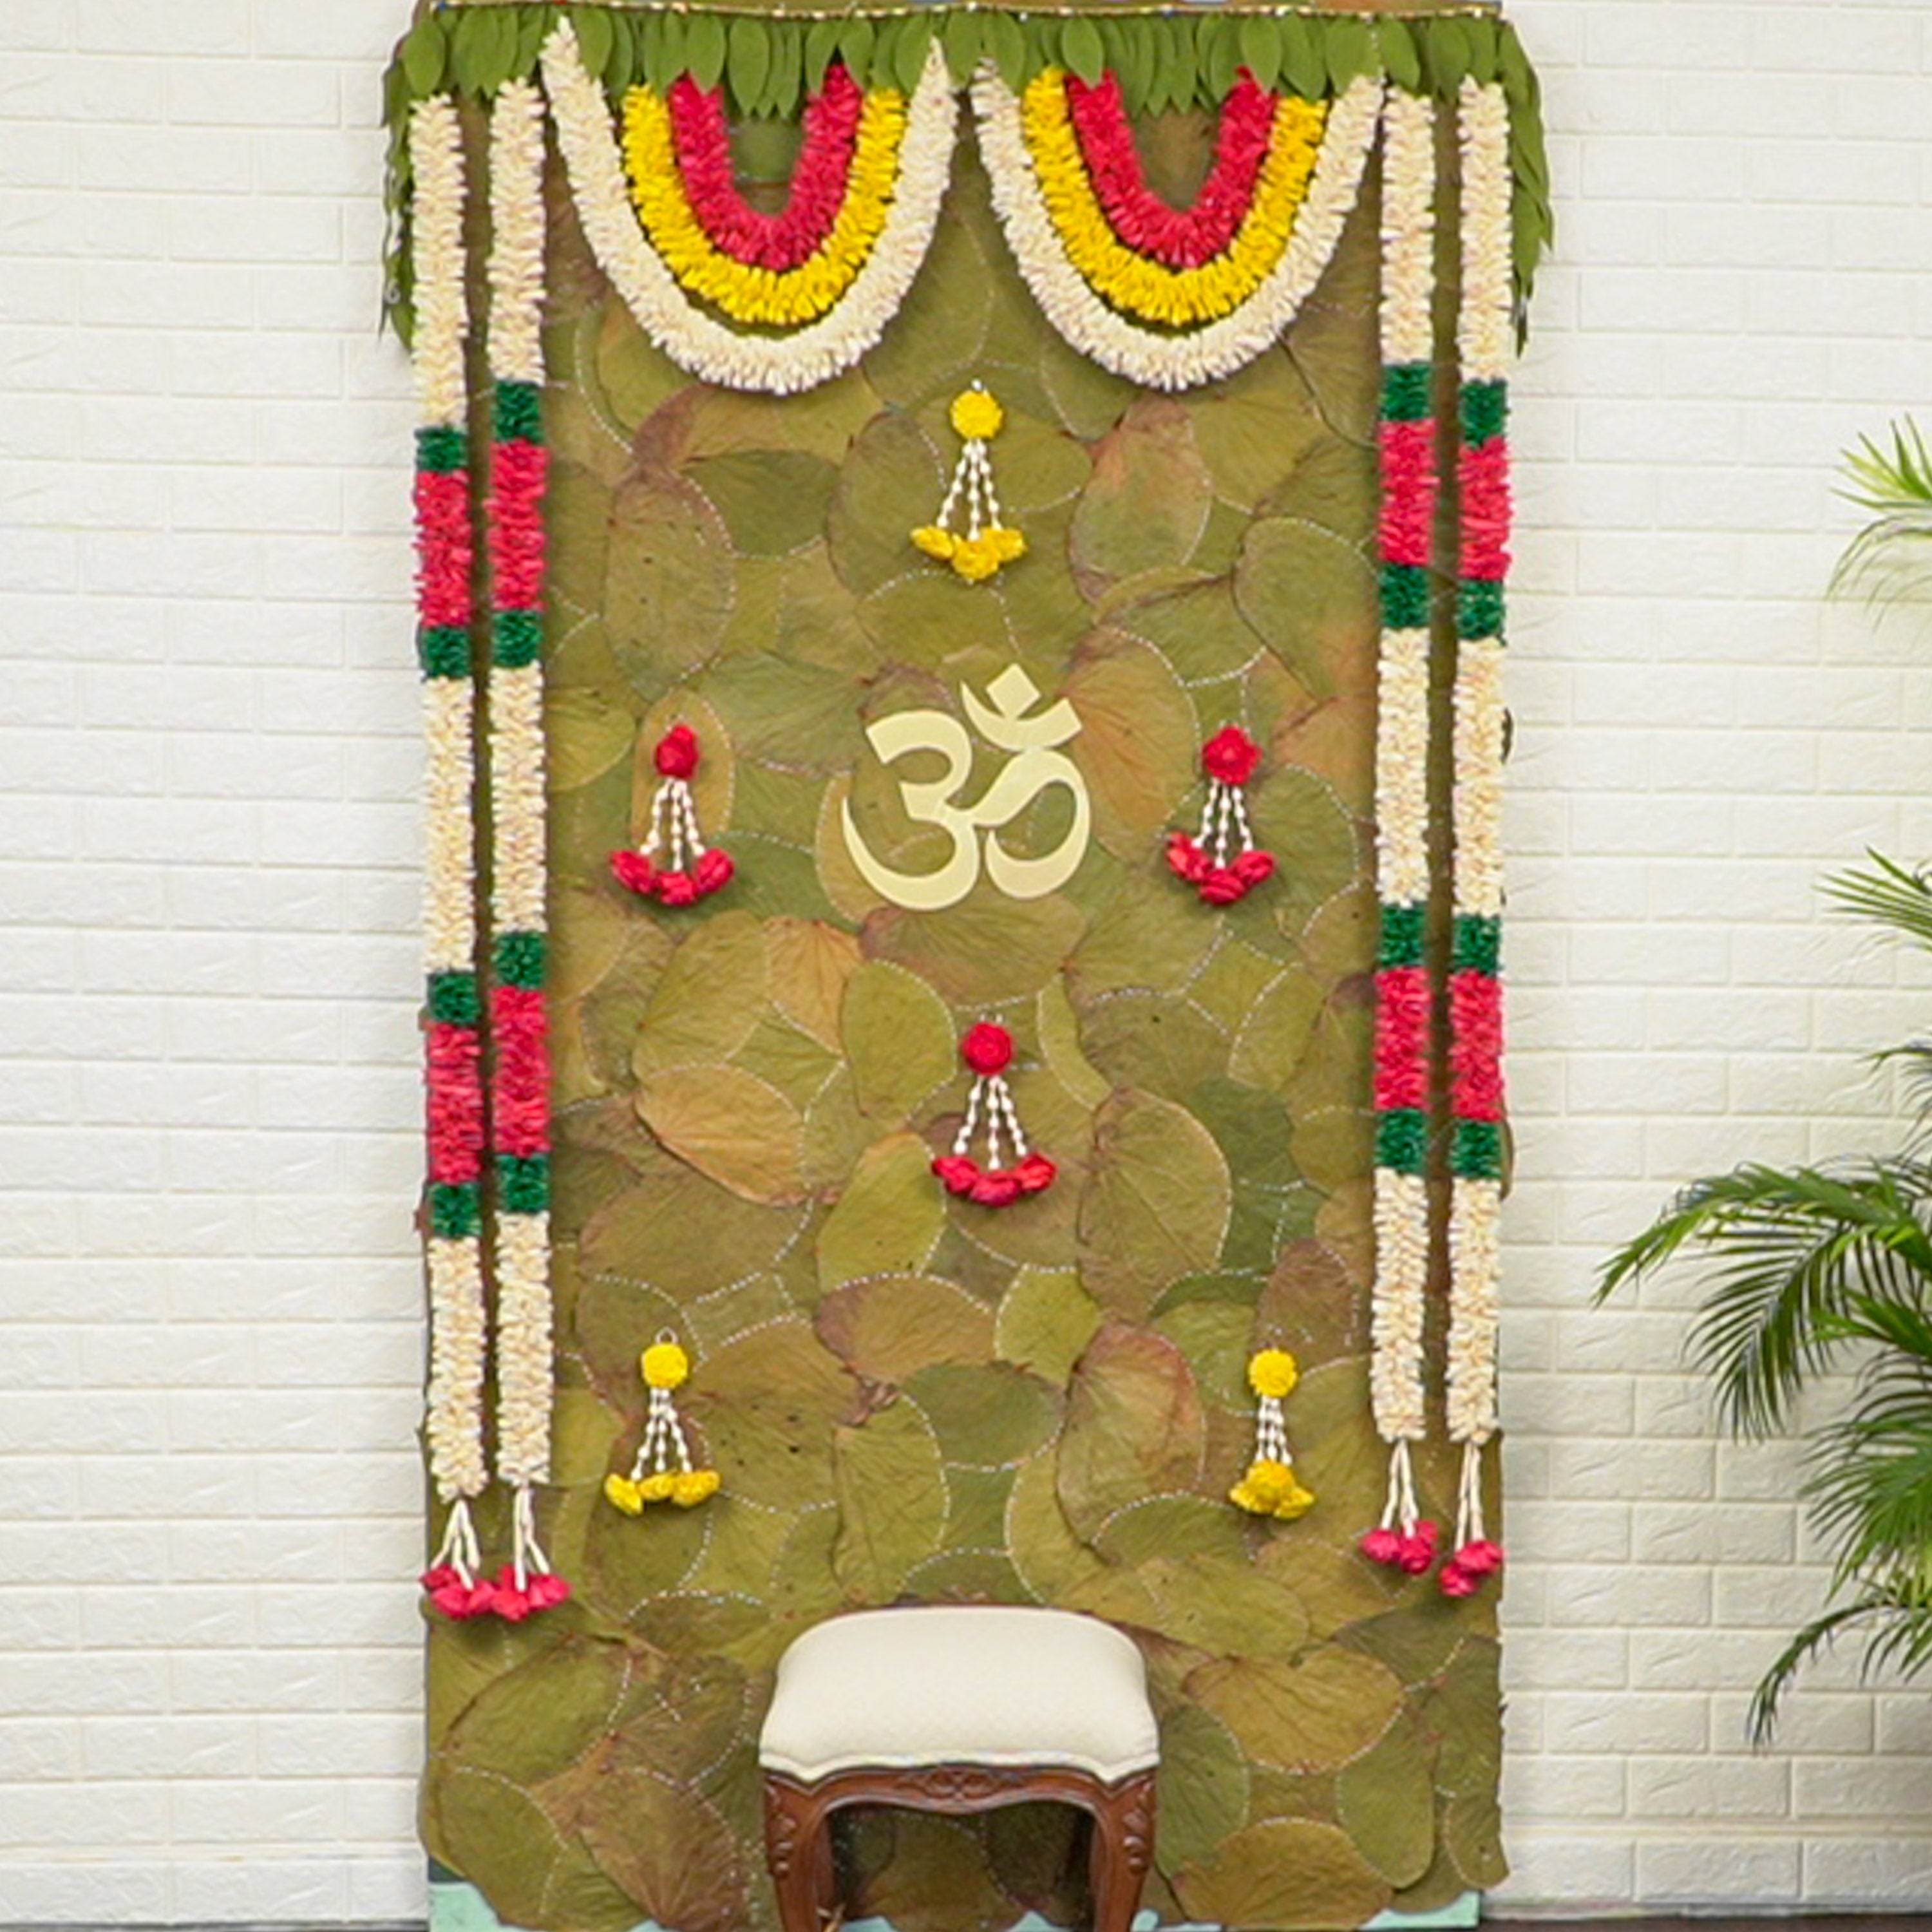 Bio-Degradable Backdrop Kit for Indian Pooja Decorations